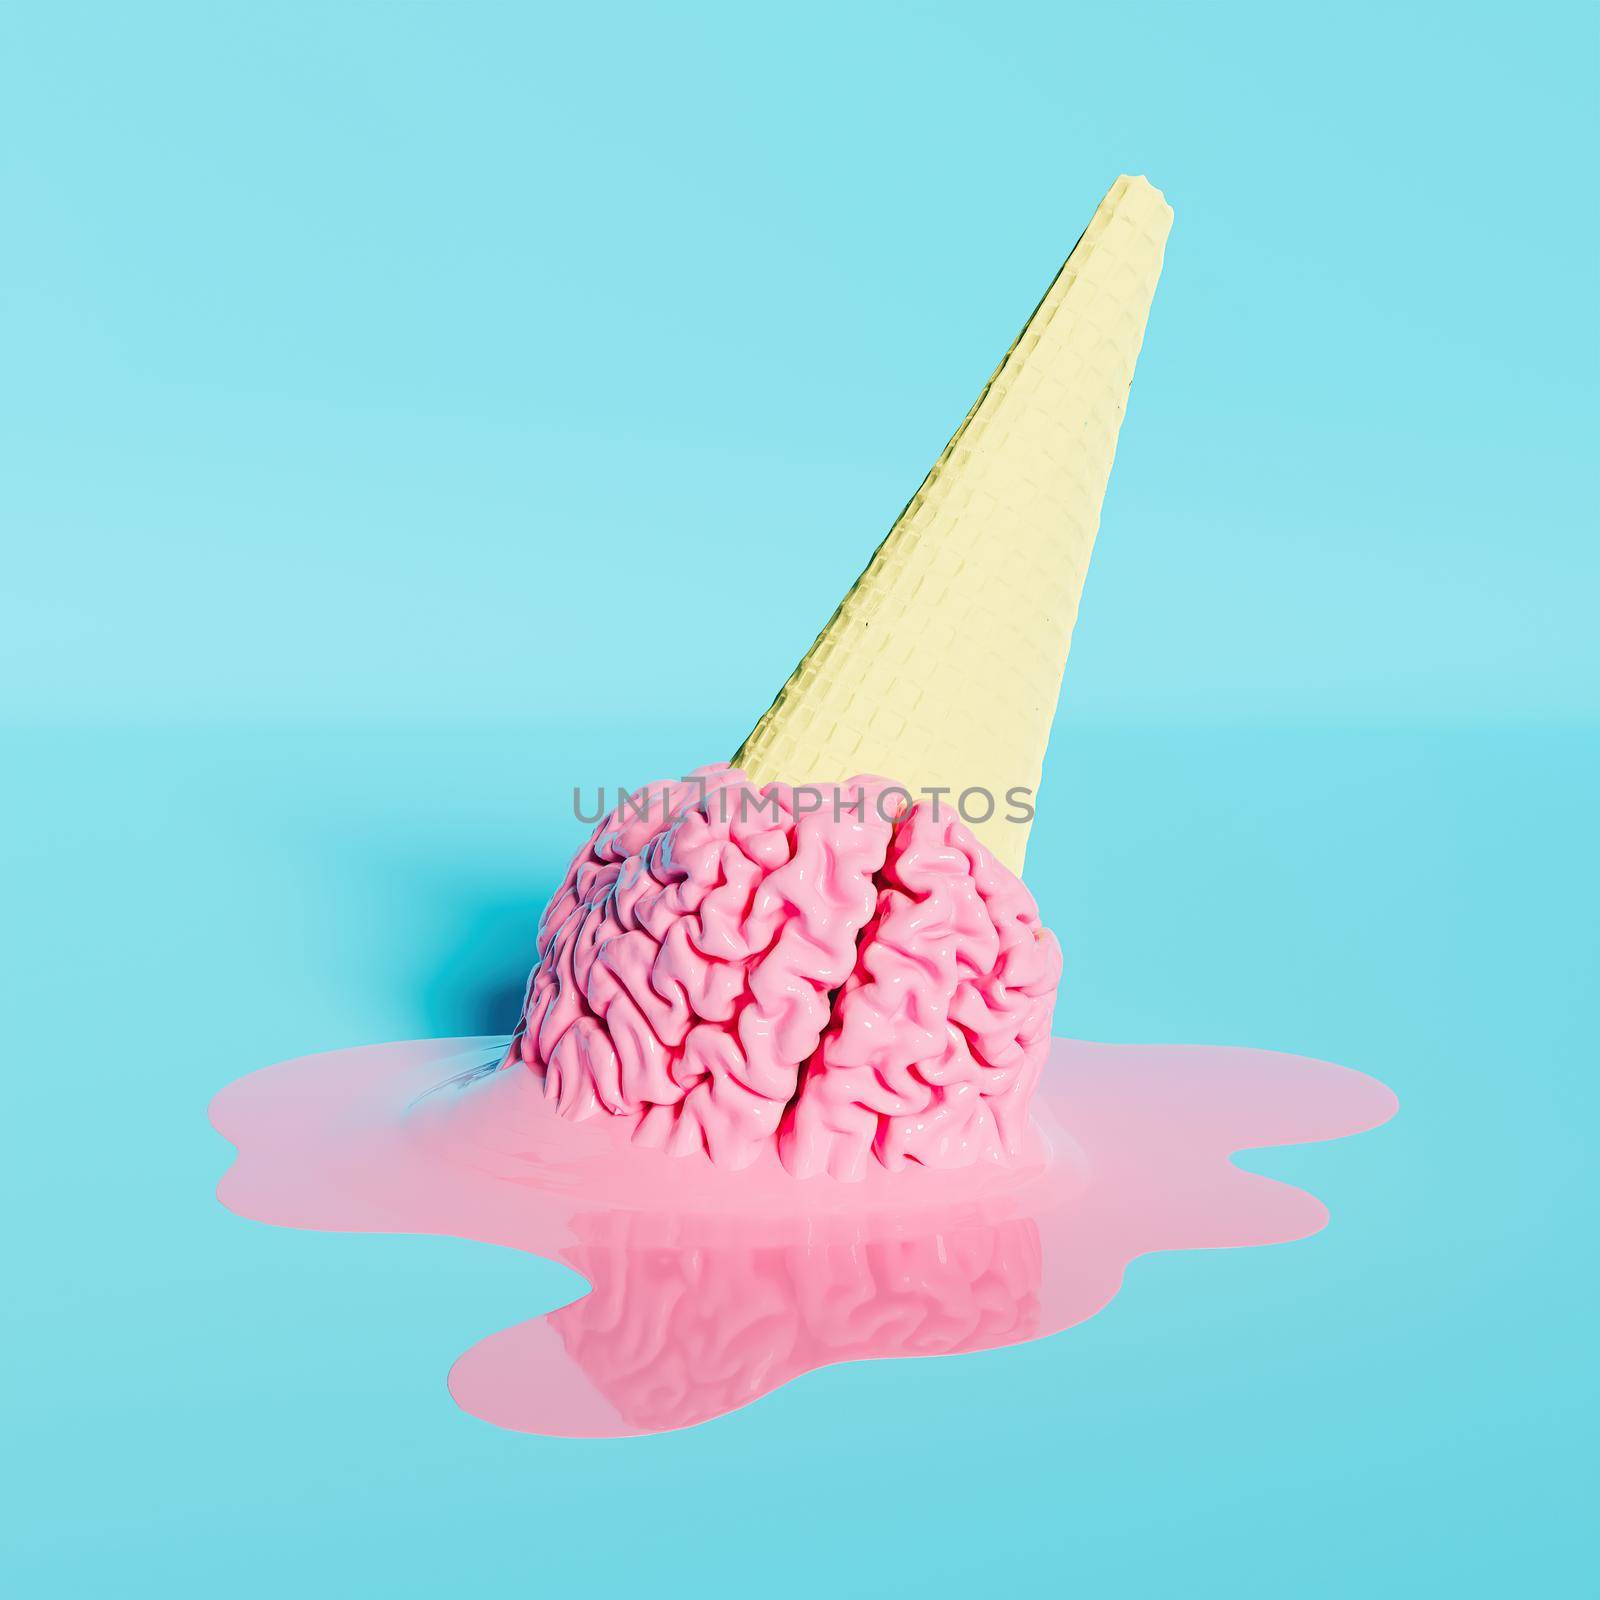 ice cream cone with melted pink brain by asolano